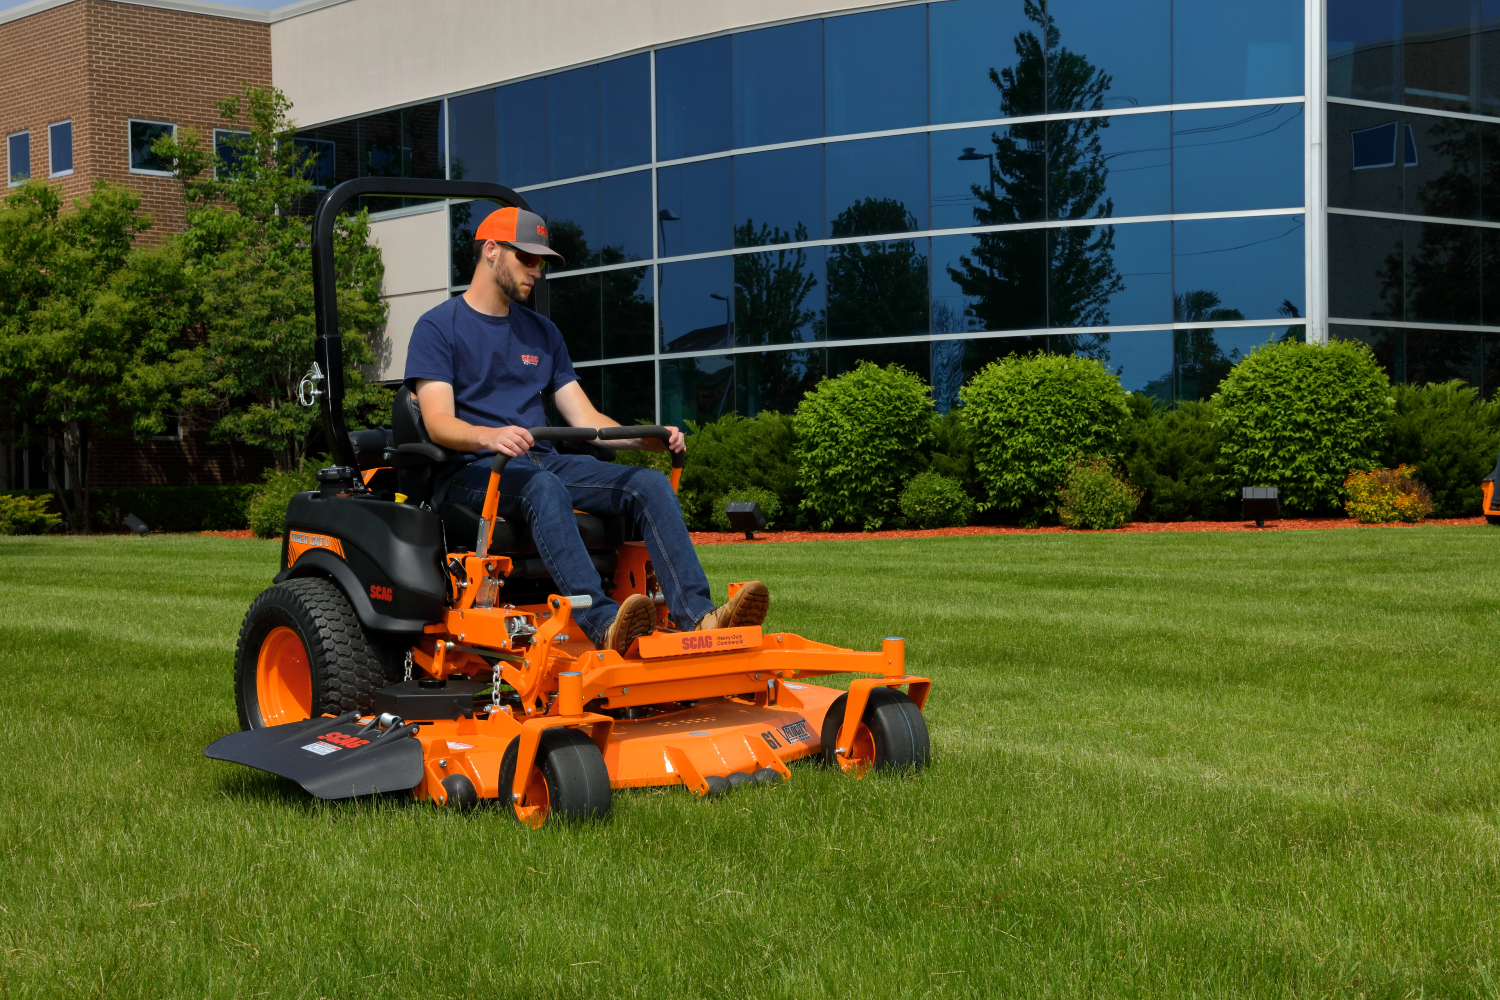 Man on a zero turn riding lawn mower is mowing a lawn outside of a glass office building